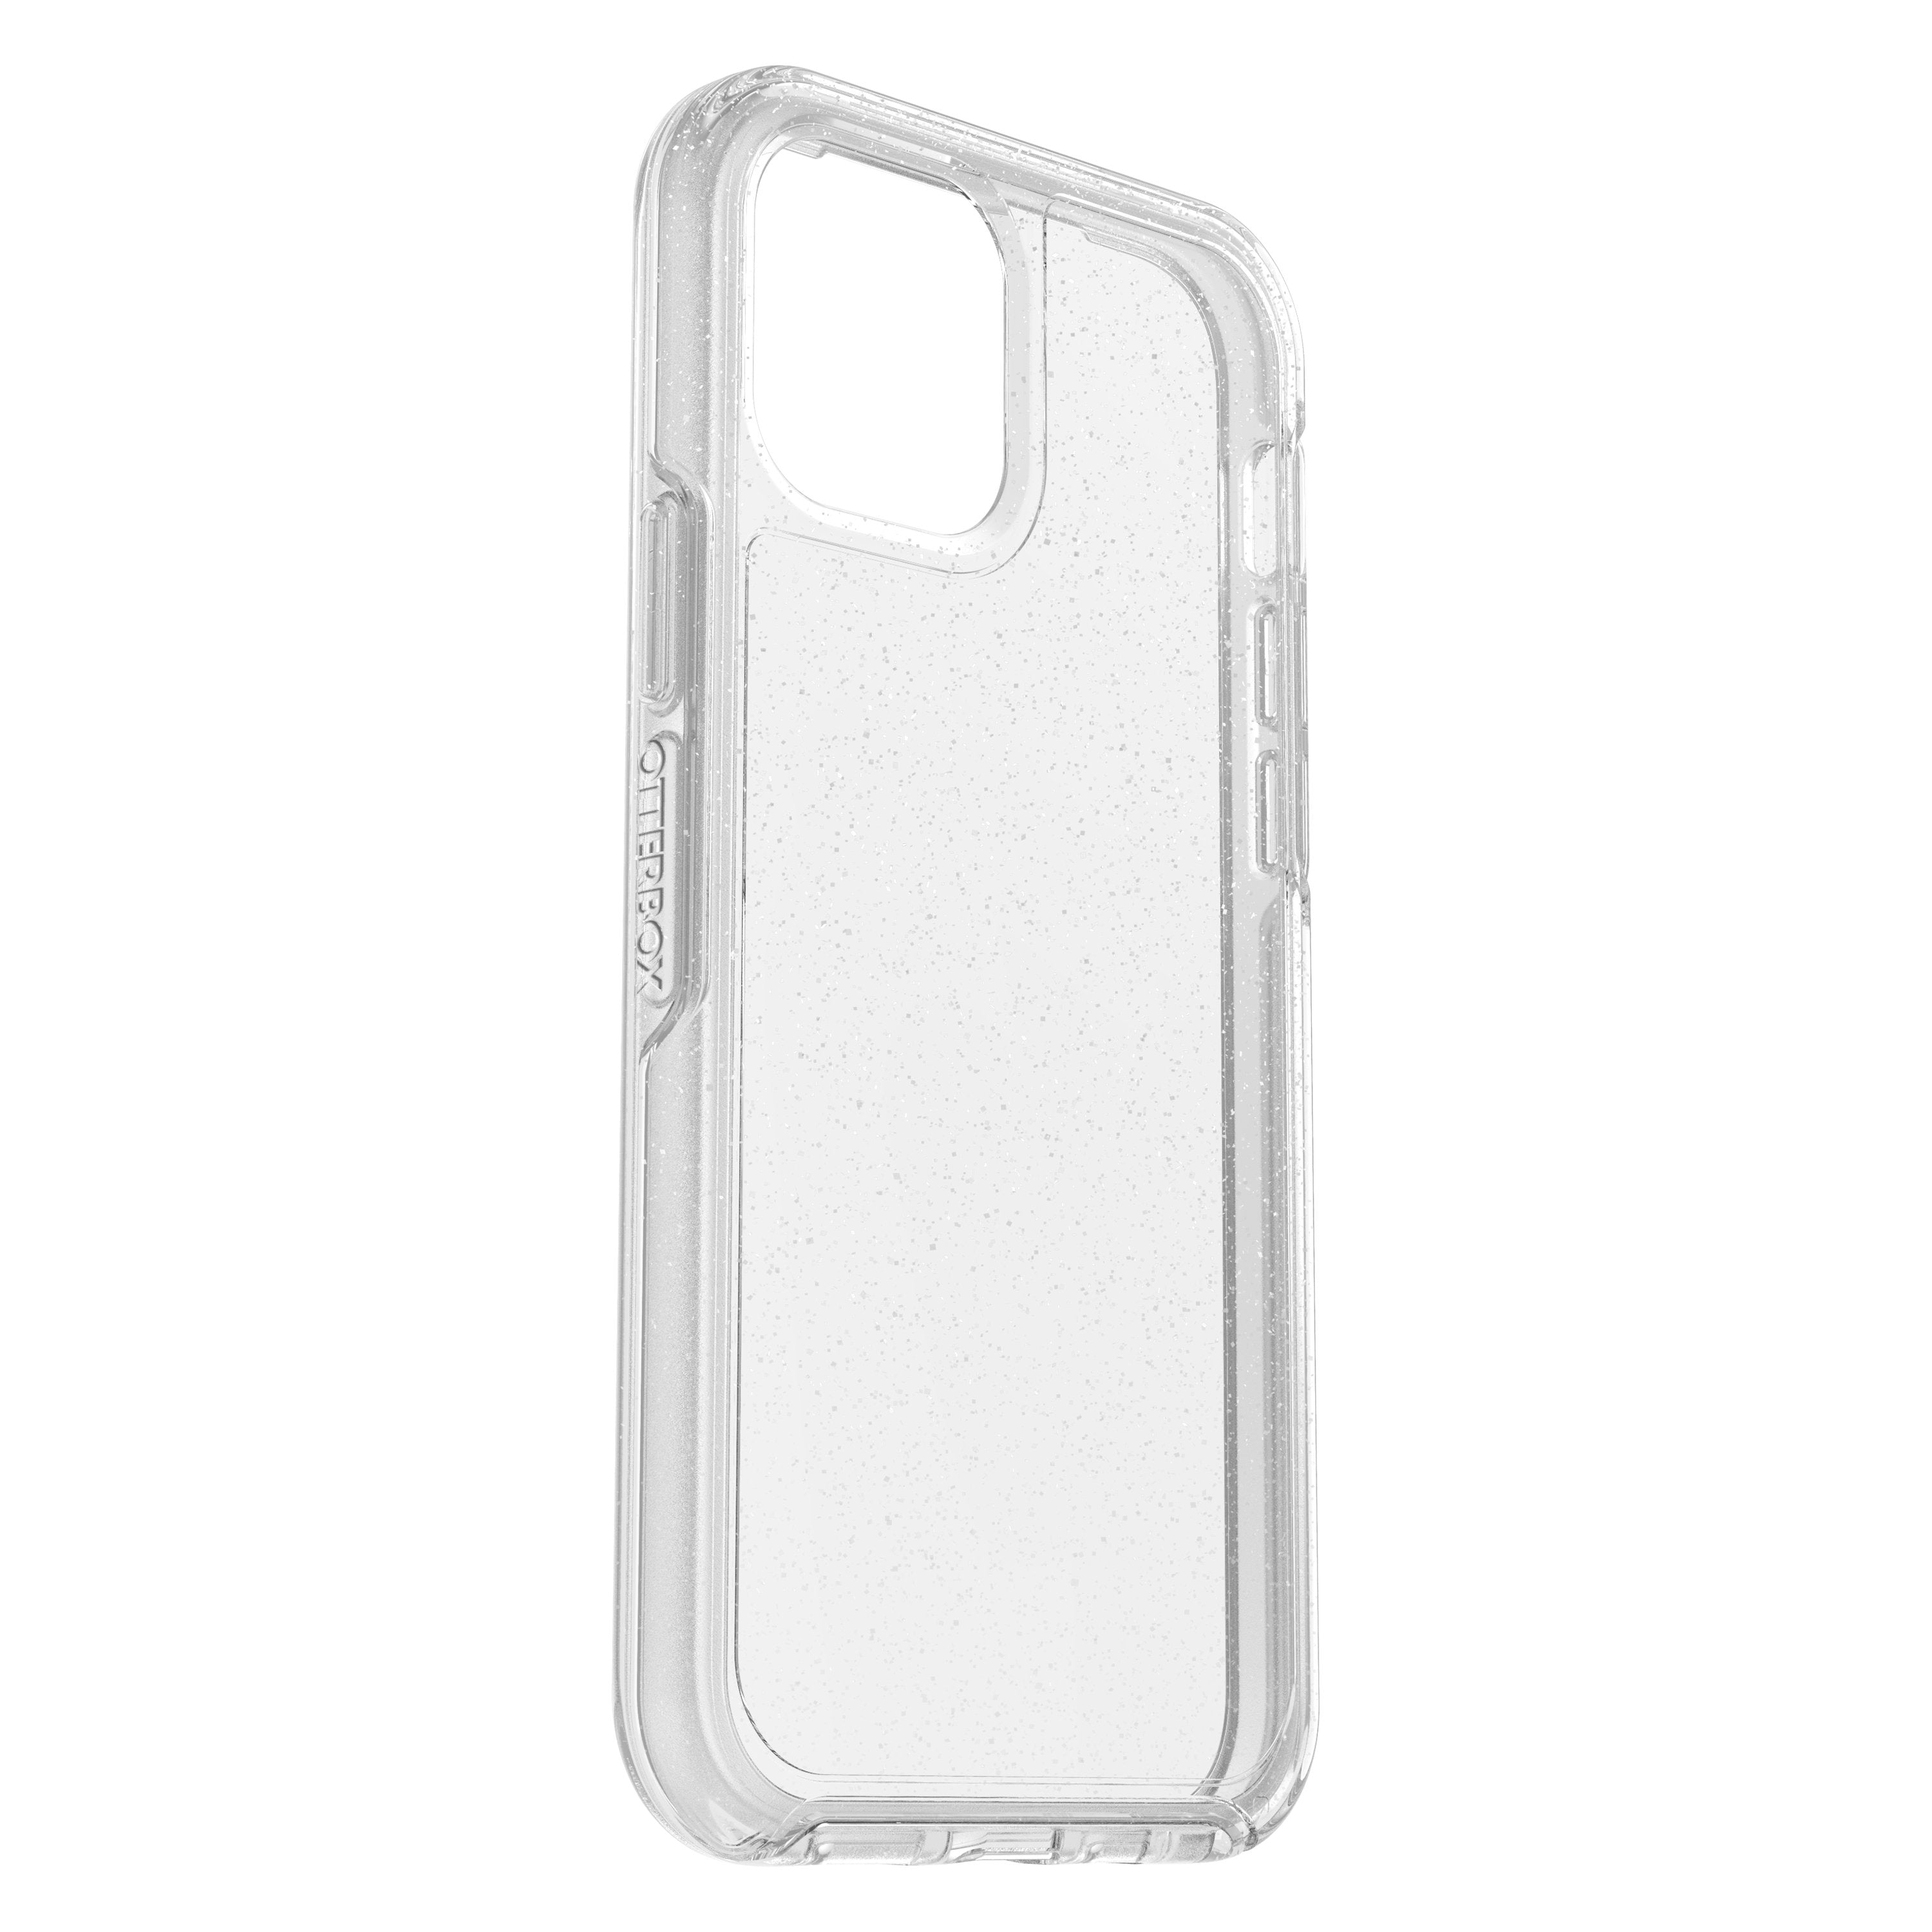 OtterBox Apple iPhone 12 / 12 Pro SYMMETRY Clear case - Slim and Lightweight Cover w/ Military Grade Drop Protection, Wireless Charging Compatible - Stardust